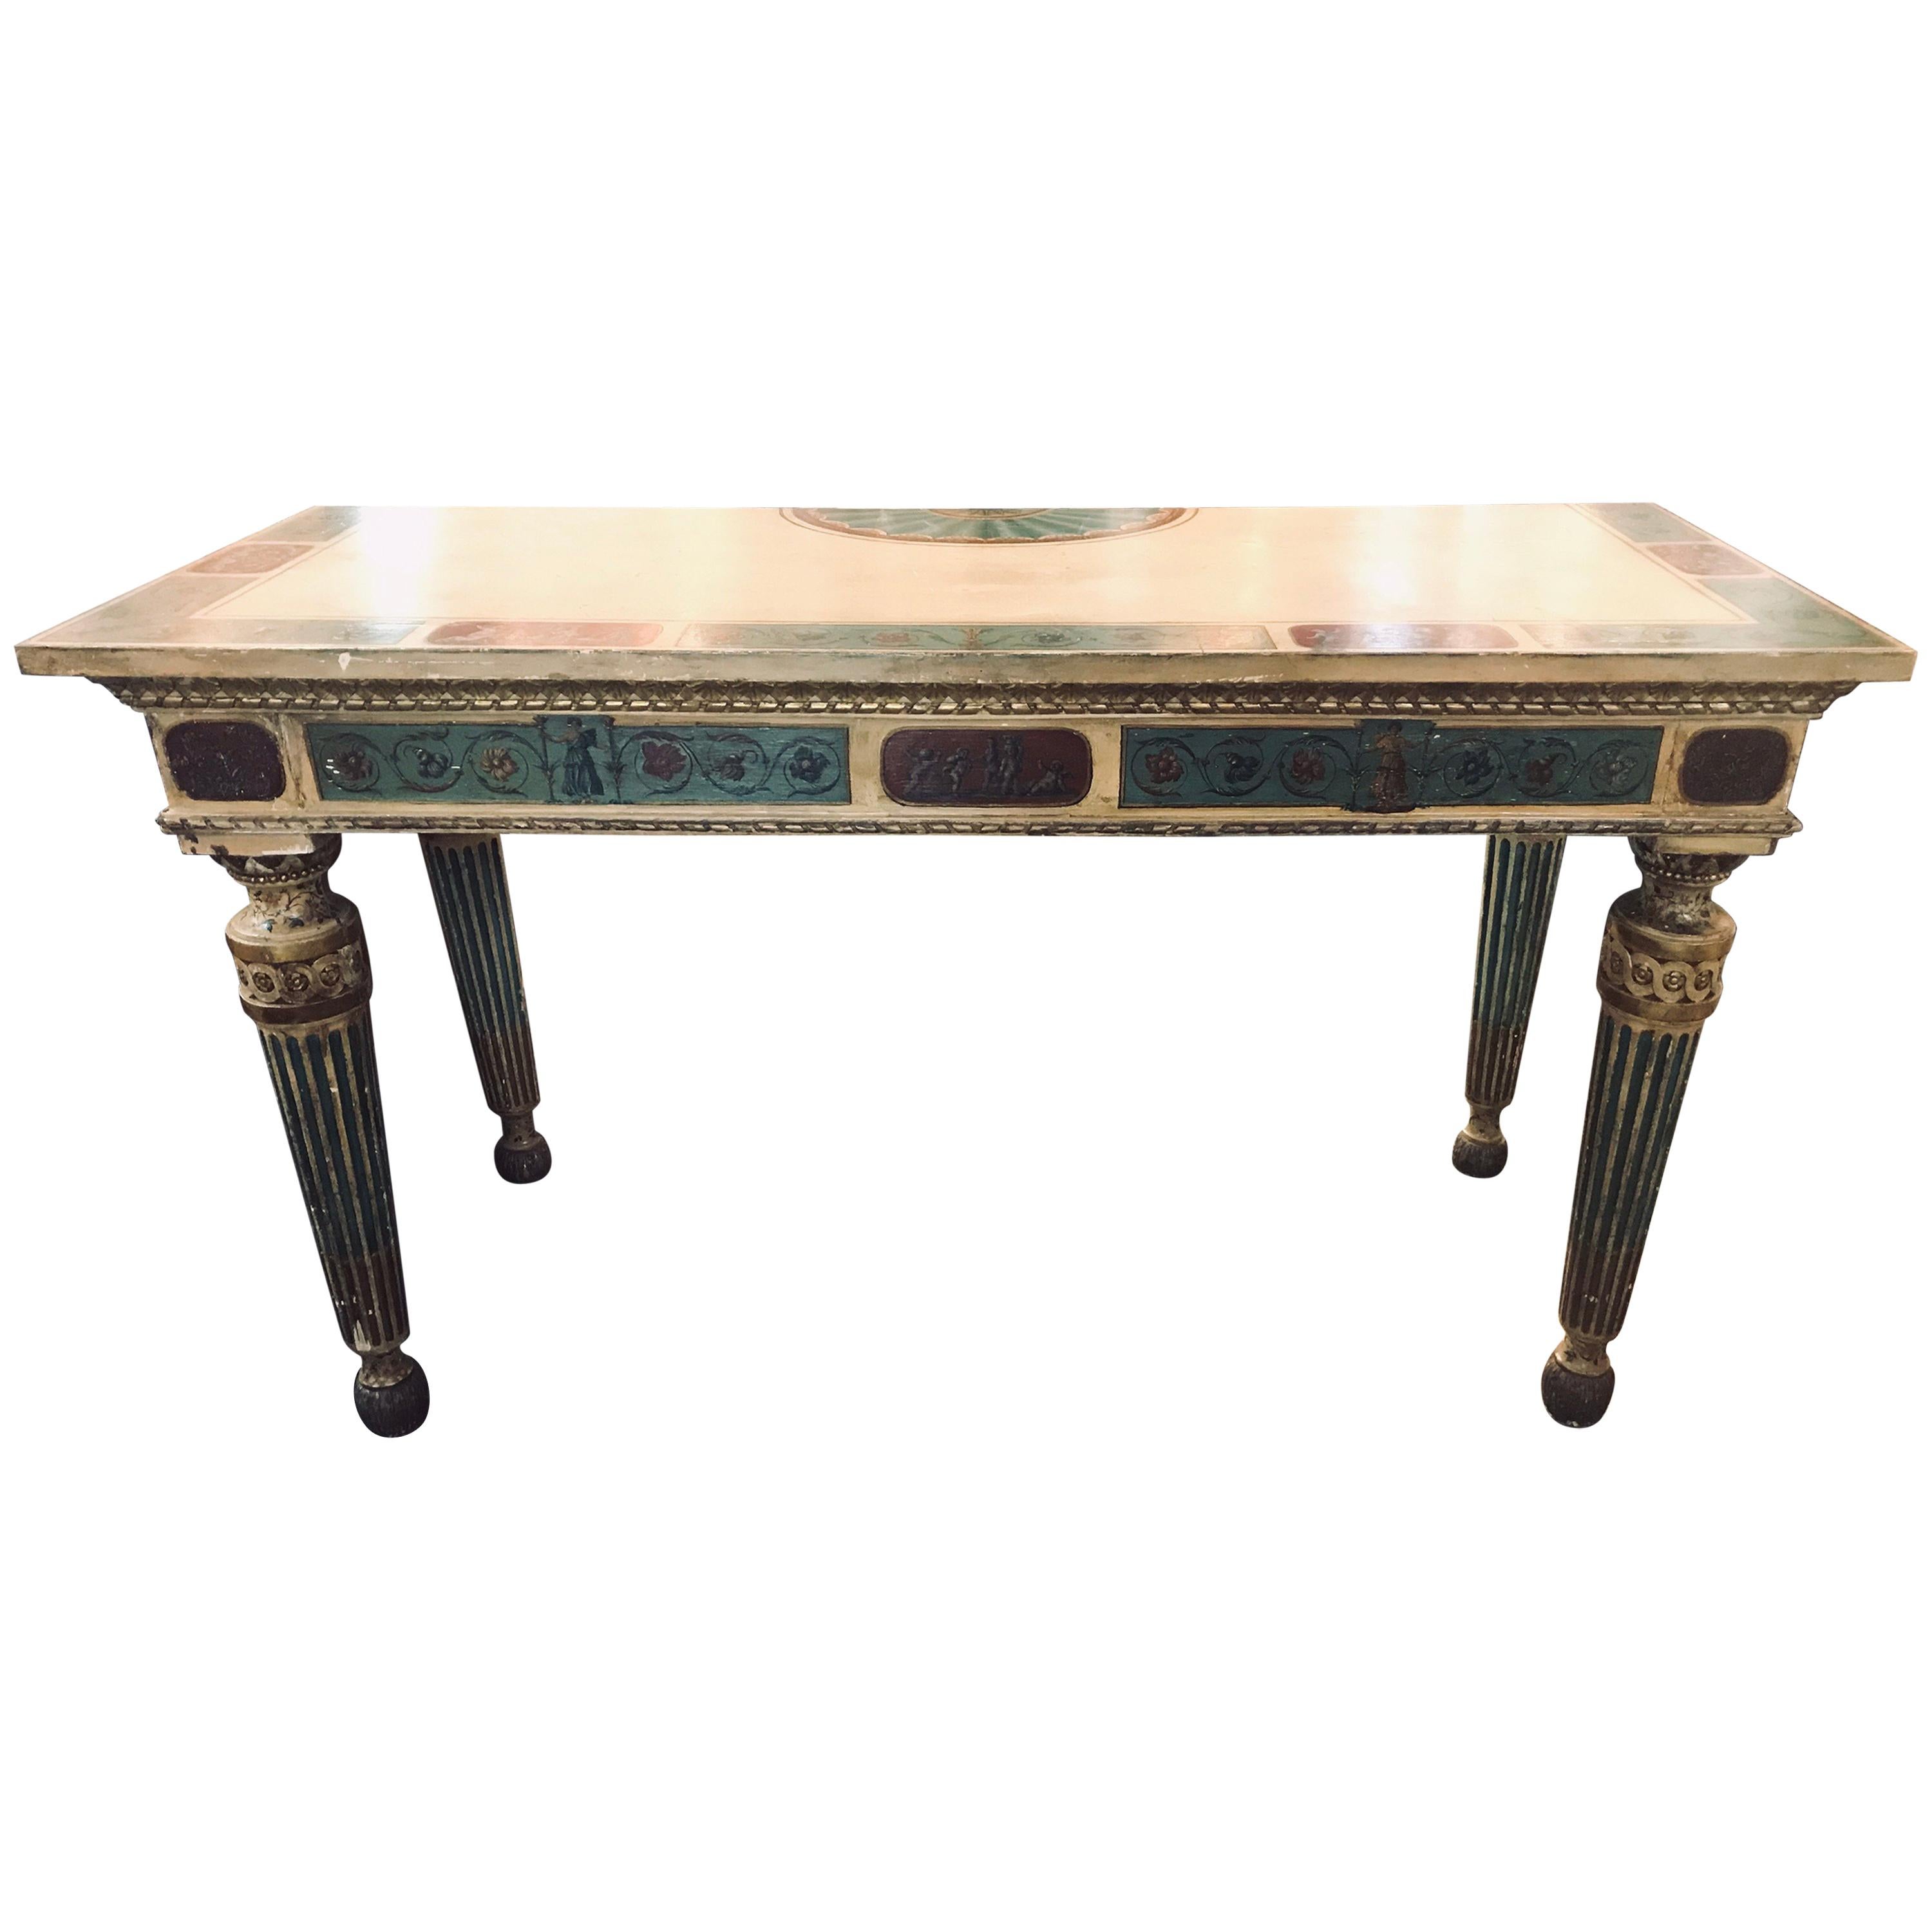 Early 19th Century Italian Neoclassical Painted Console